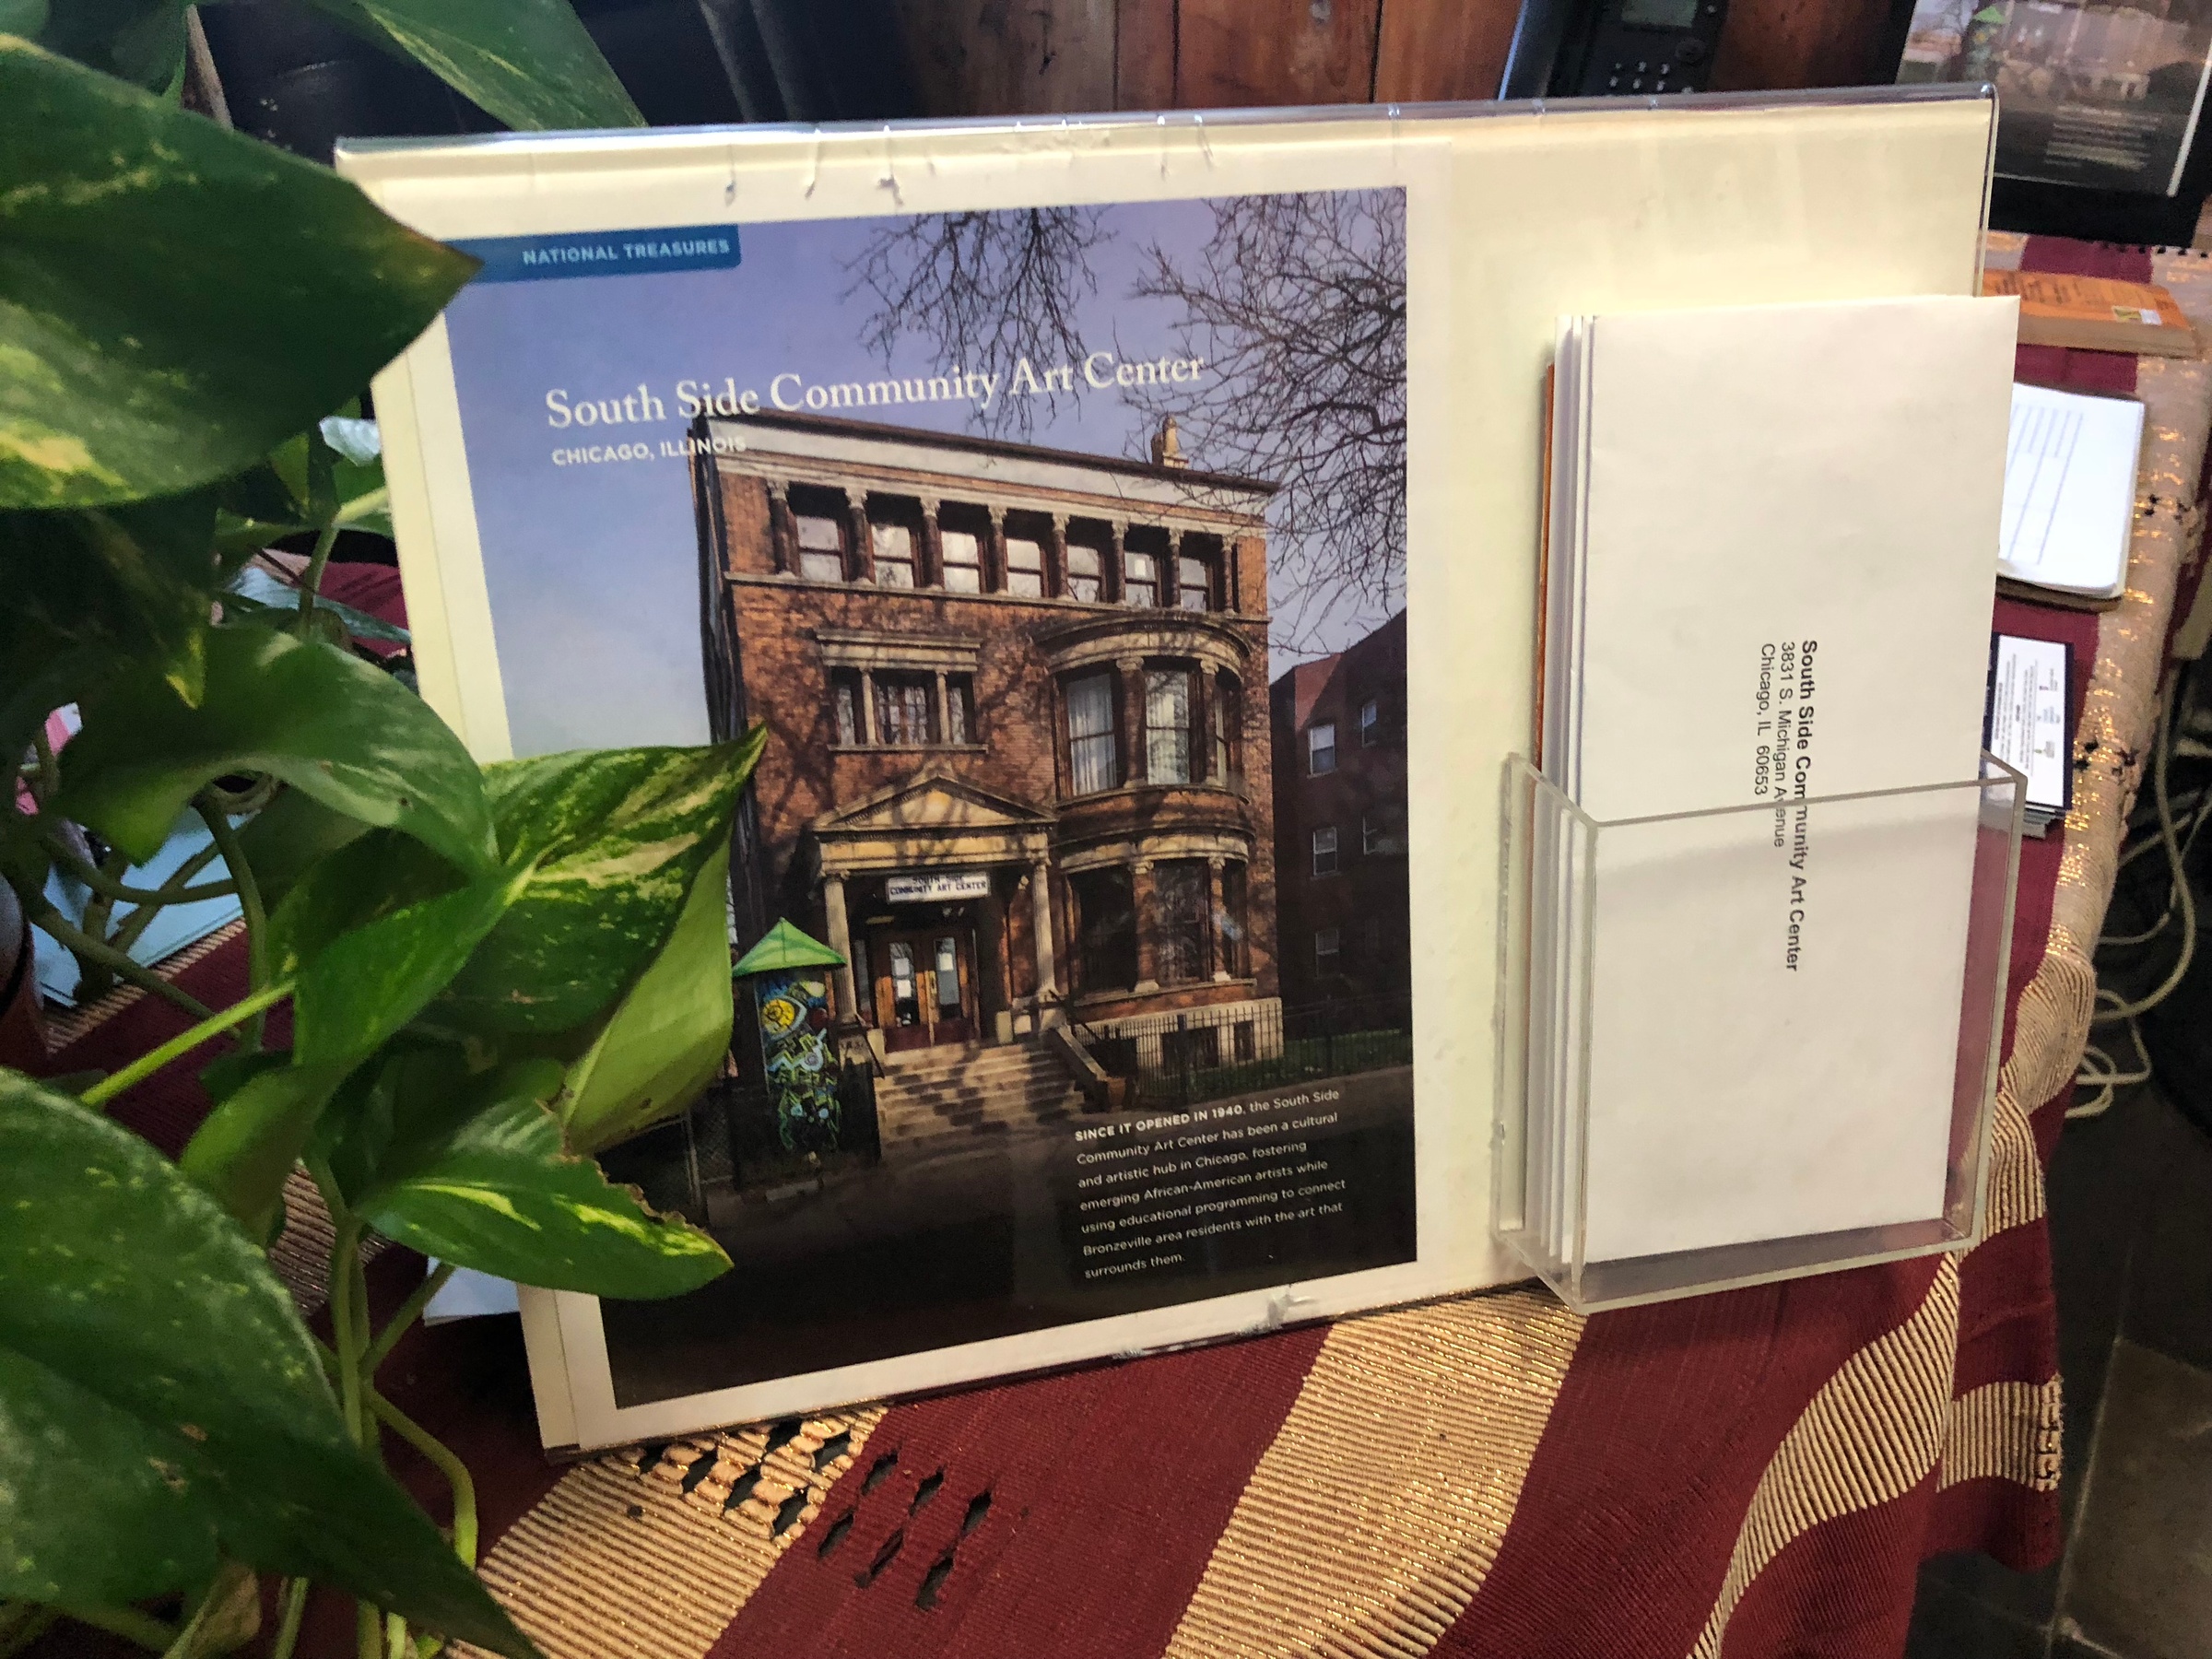 Process photograph from the 2018 offsite rendition of Curatorial Exchange with Art Institute Chicago. An acrylic document stand holds a photograph about the South Side Community Art Center in Chicago, Illinois, along with pre-addressed envelopes to the Center.
